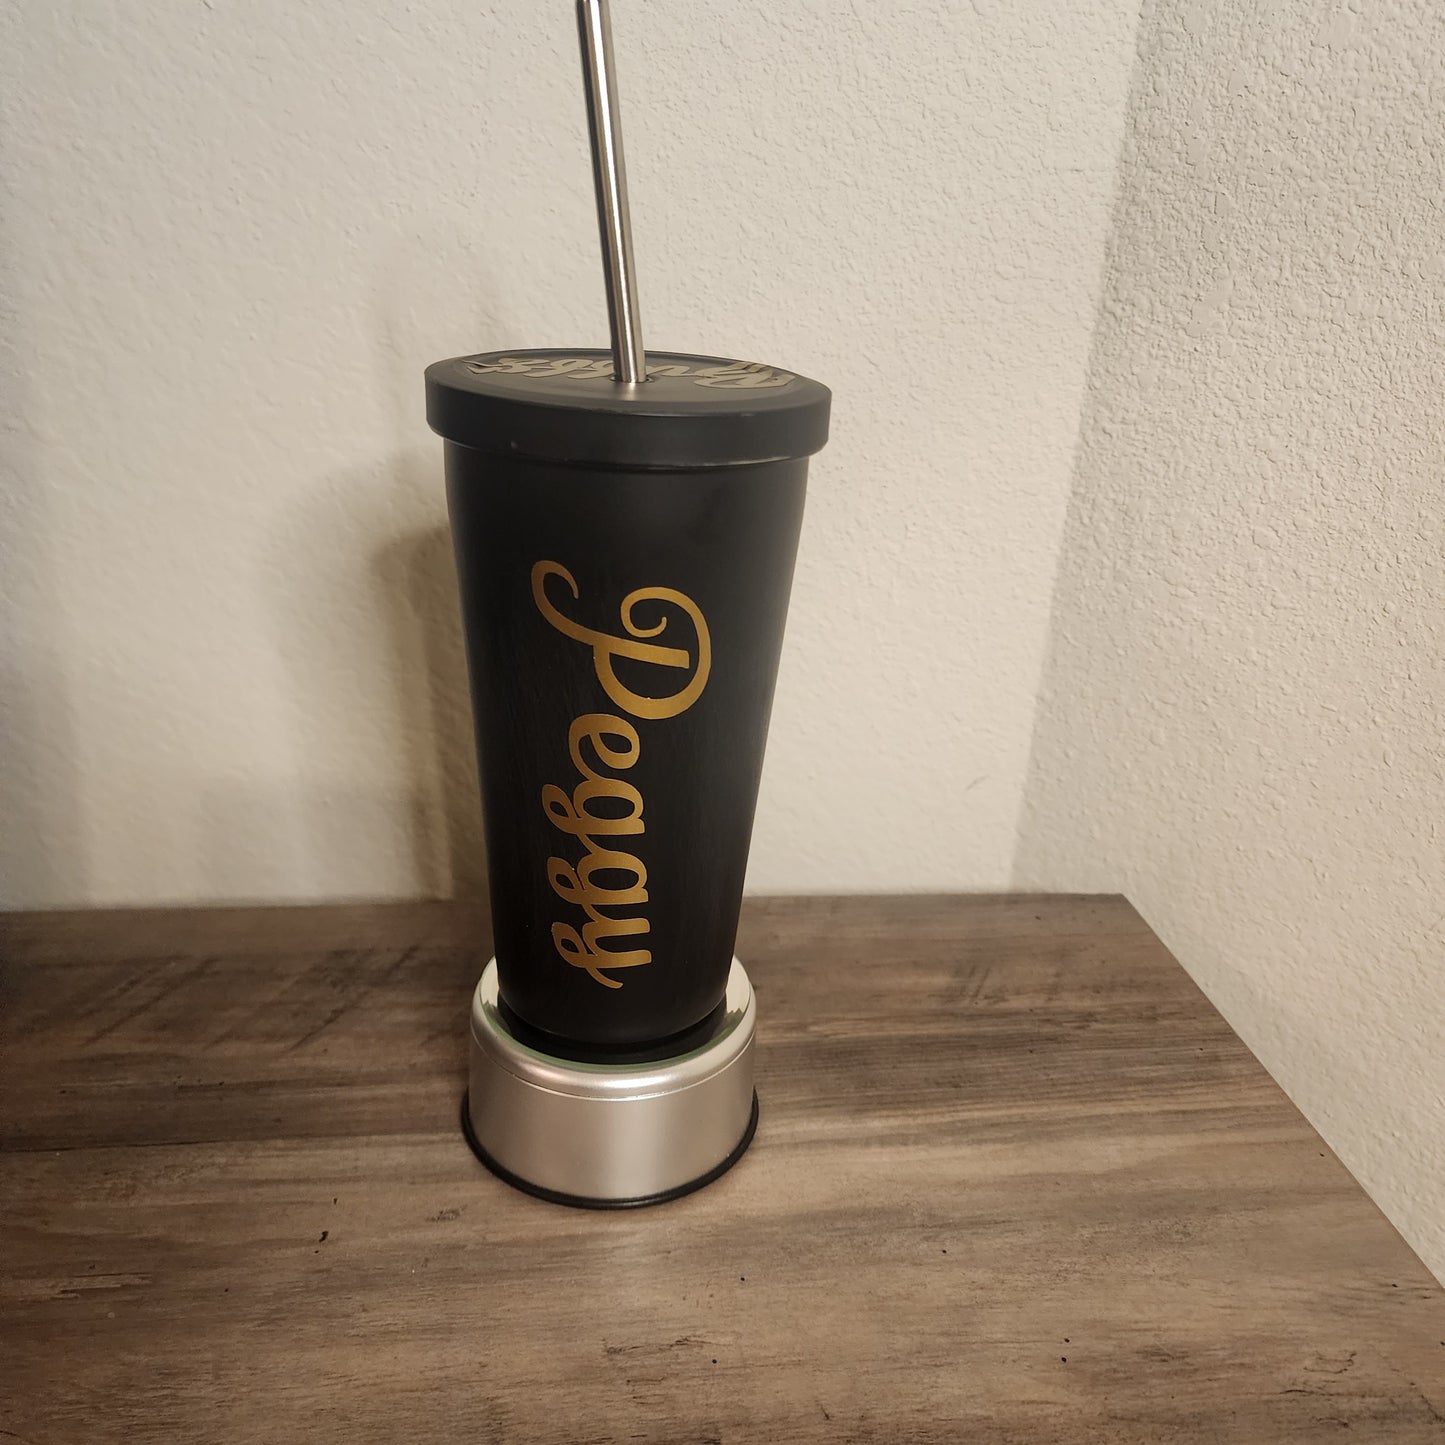 Colorado Buffs Rhinestone/Bling Personalized 19 oz Stainless Steel Tumbler with Straw